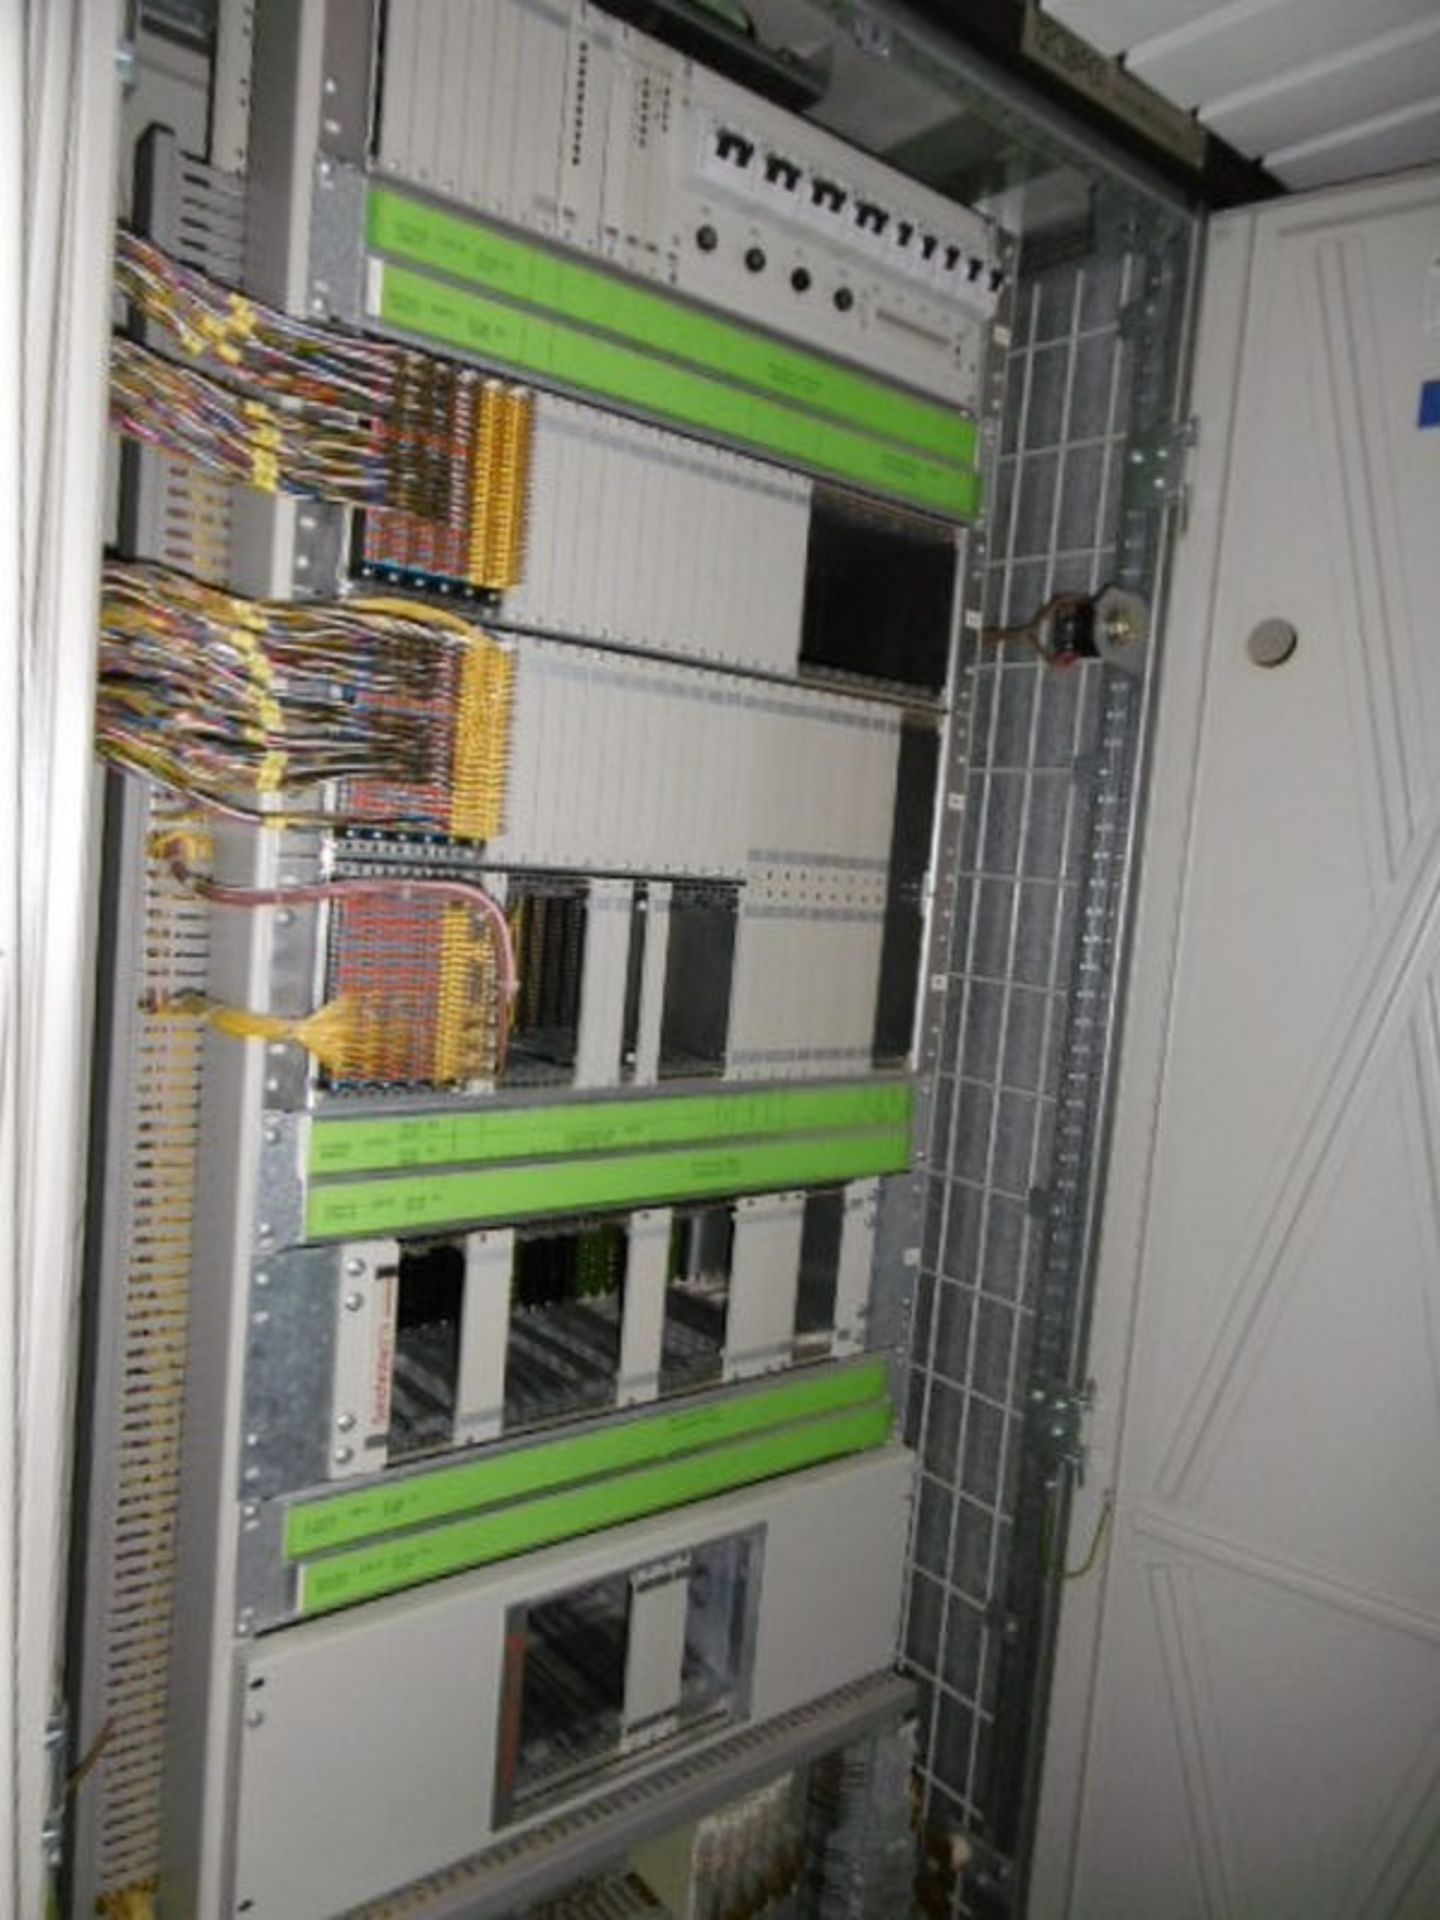 Large Qty Switchgear - From Gas Turbine 2 Control Module Building - Image 33 of 36